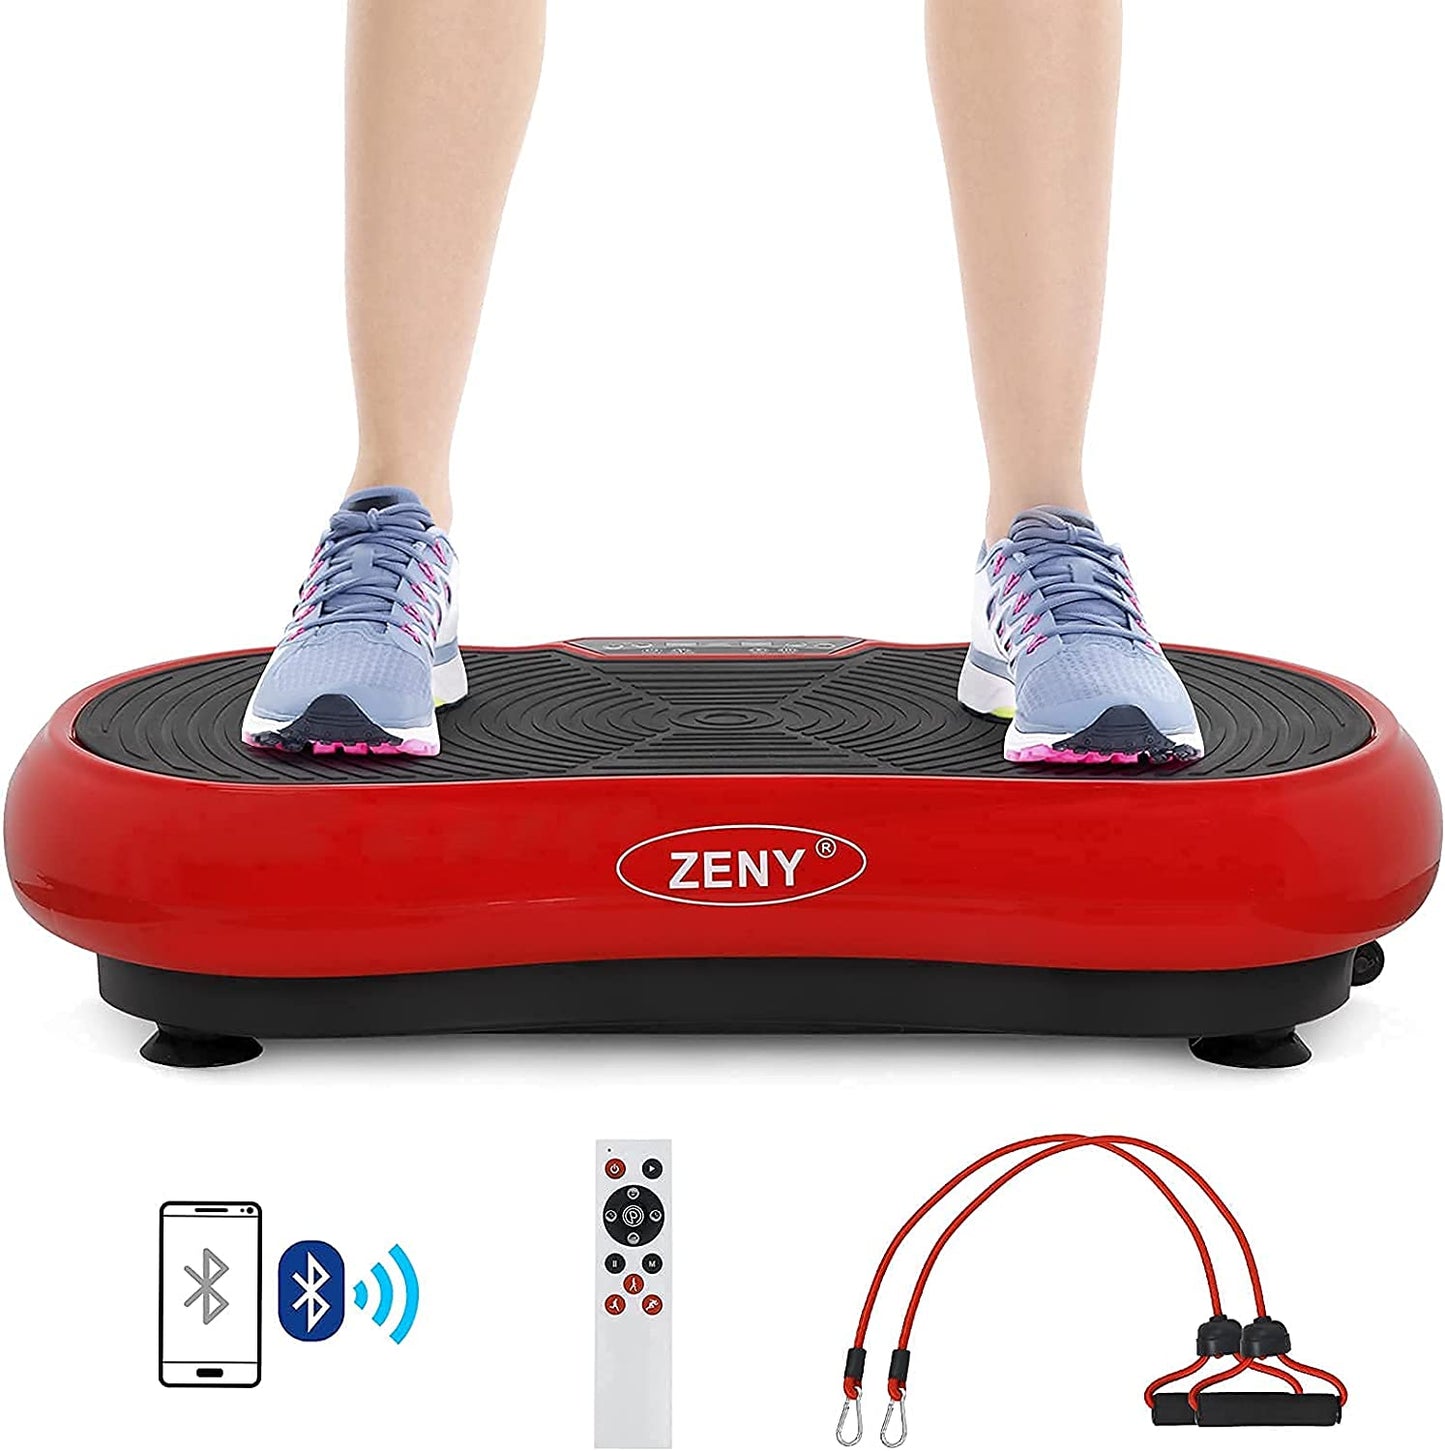 Viration Platform Exercise Machine Whole Body Vibrating Plate Weight Loss Home Workout Exercise Equipment, Remote Bluetooth and Resistant Bands